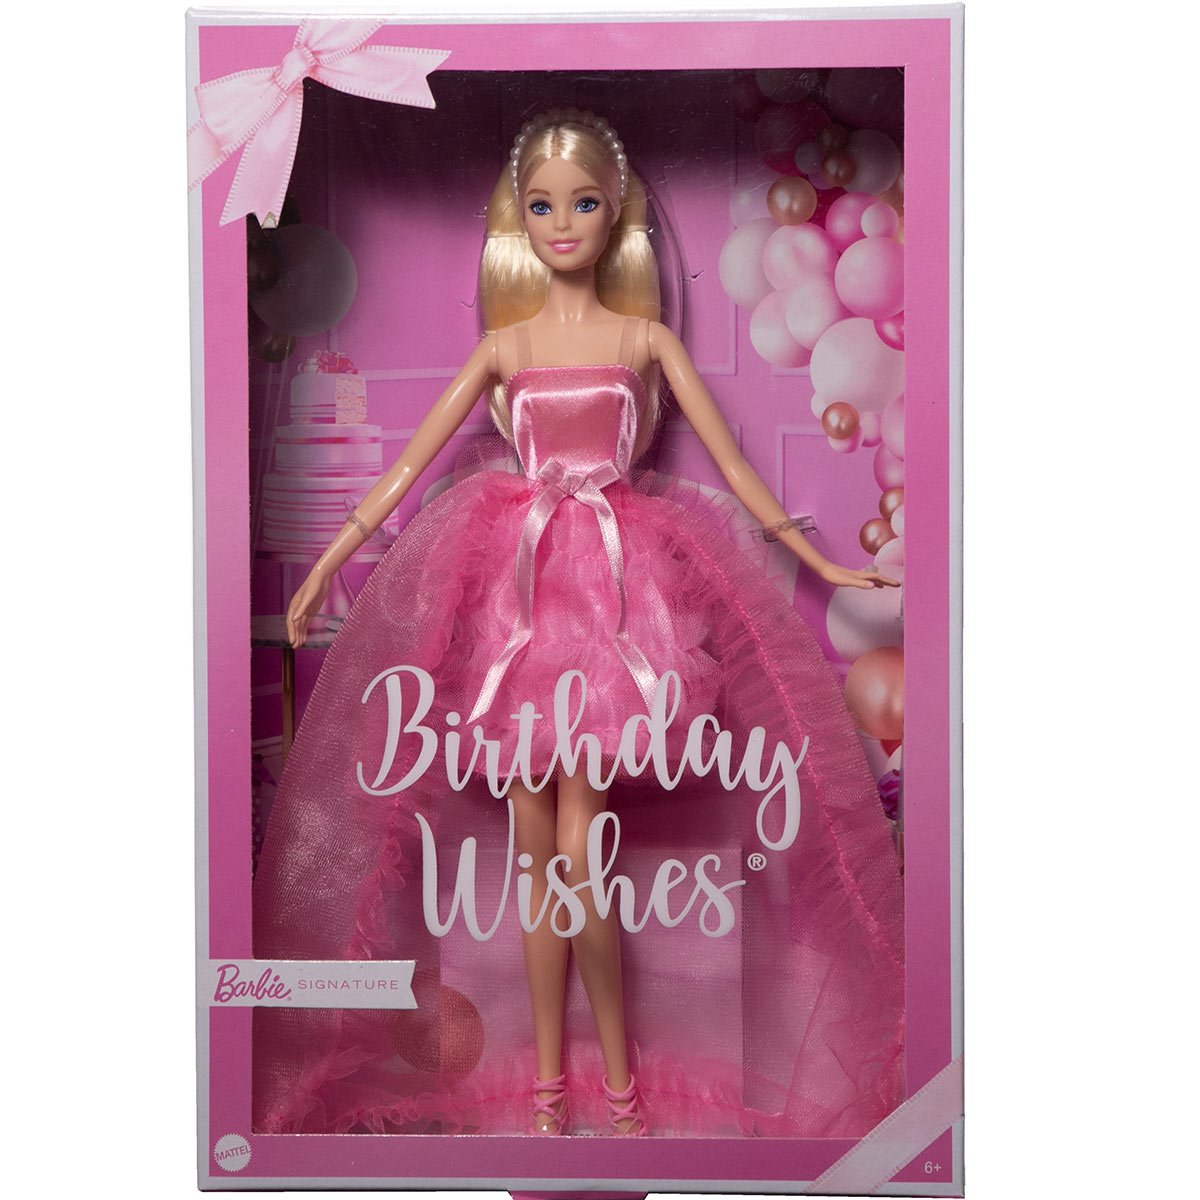 Barbie Birthday Wishes Doll - Entertainment Earth